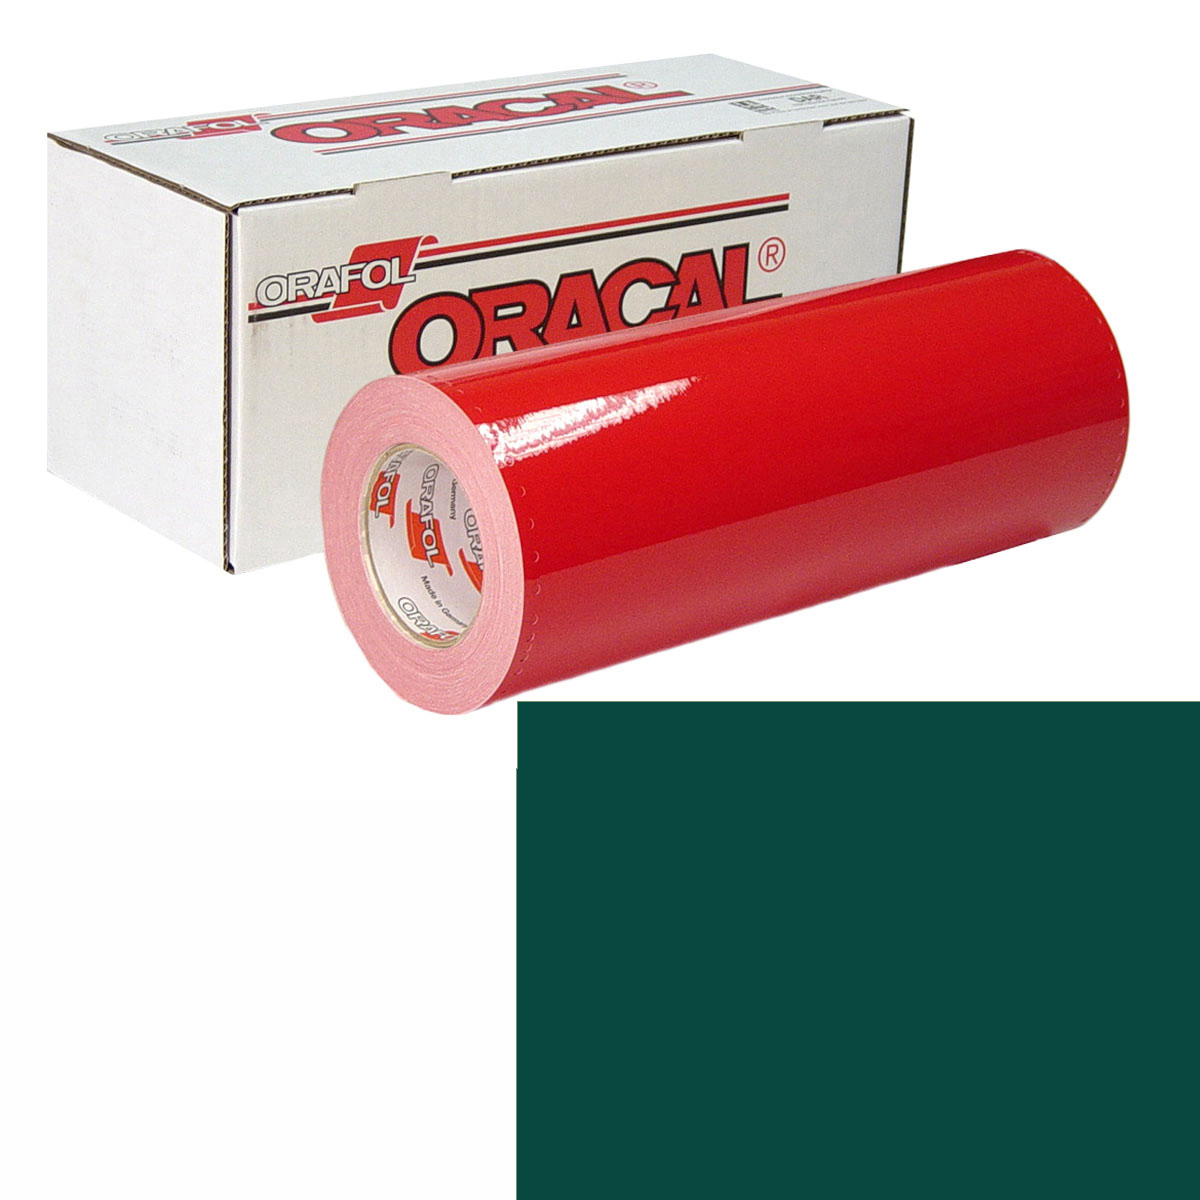 ORACAL 951 30in X 10yd 635 Forest Green